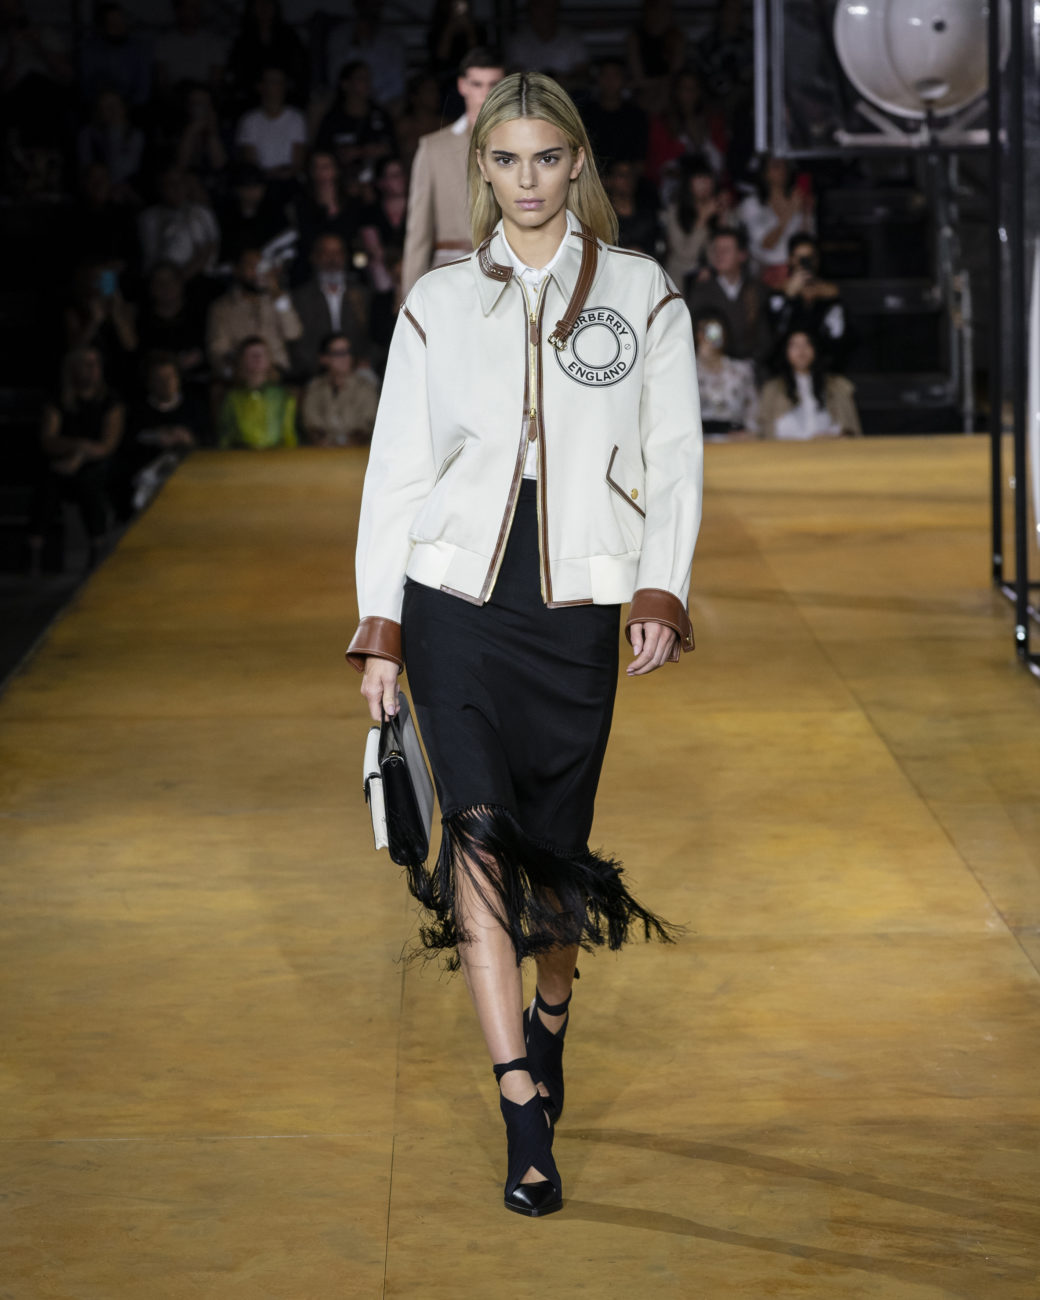 Burberry Spring Summer 2020 Collection, Courtesy of Burberry